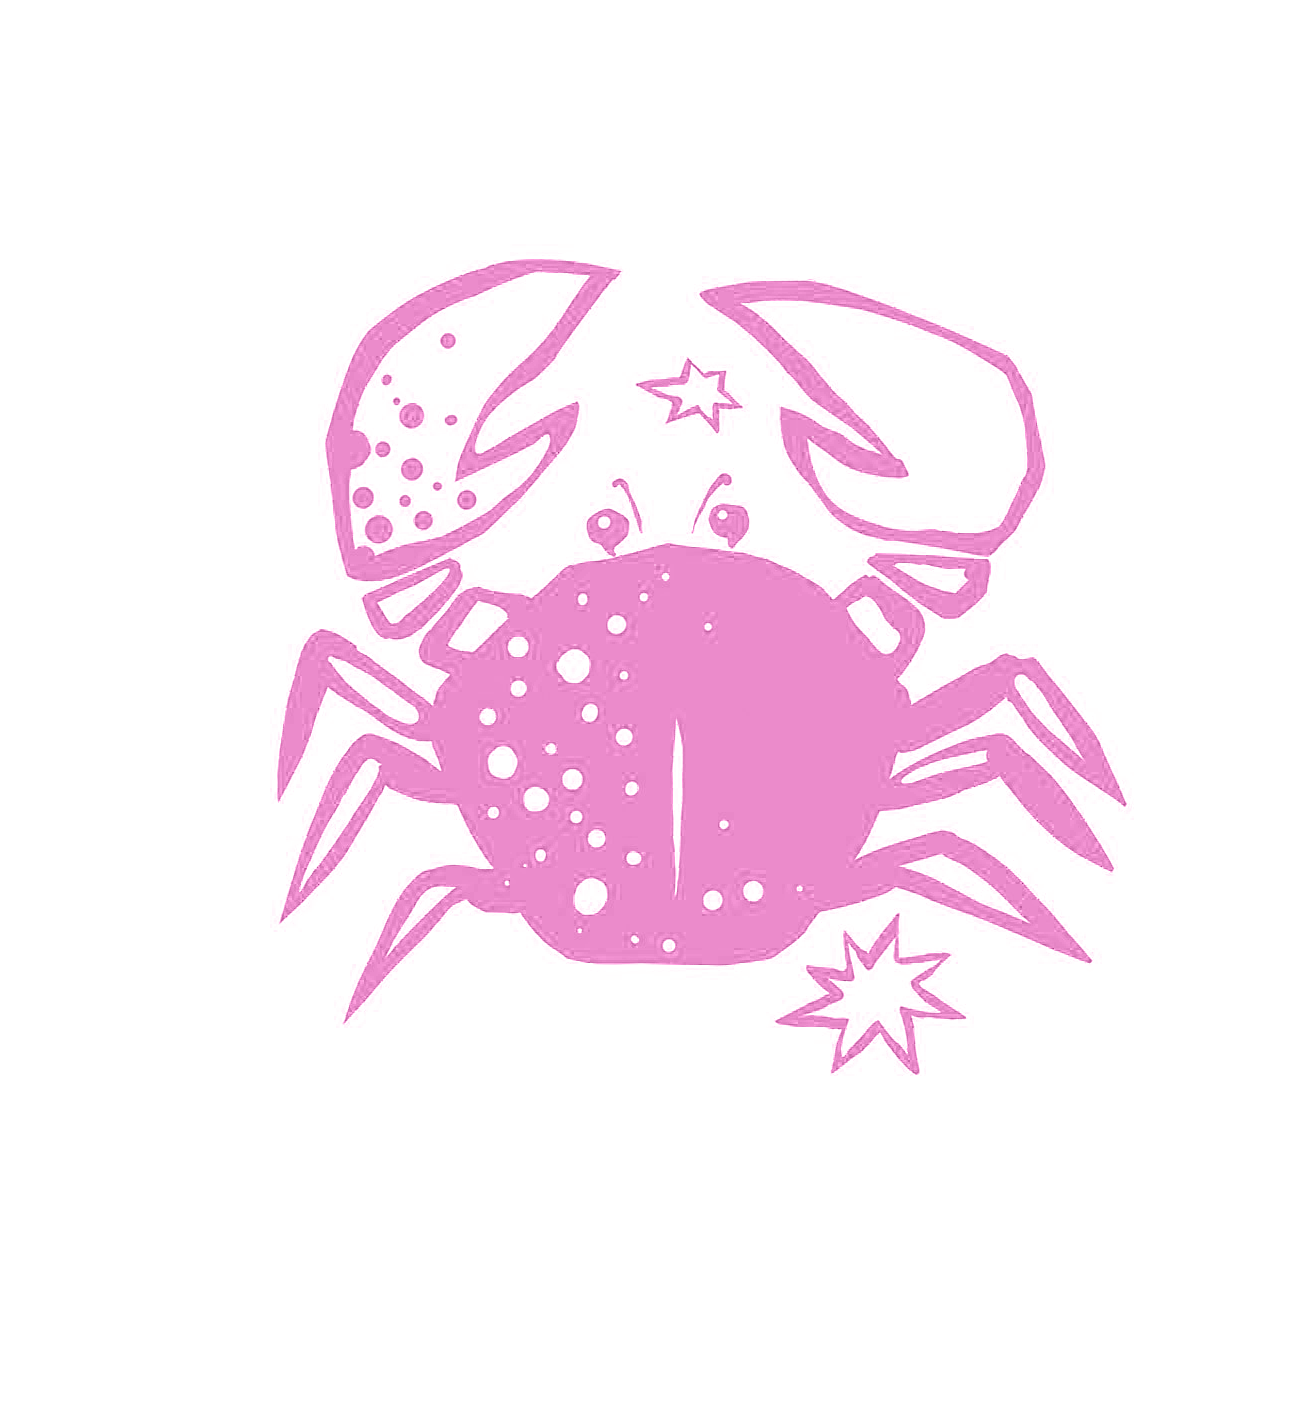 A pink illustration of a crab with small stars surrounding it